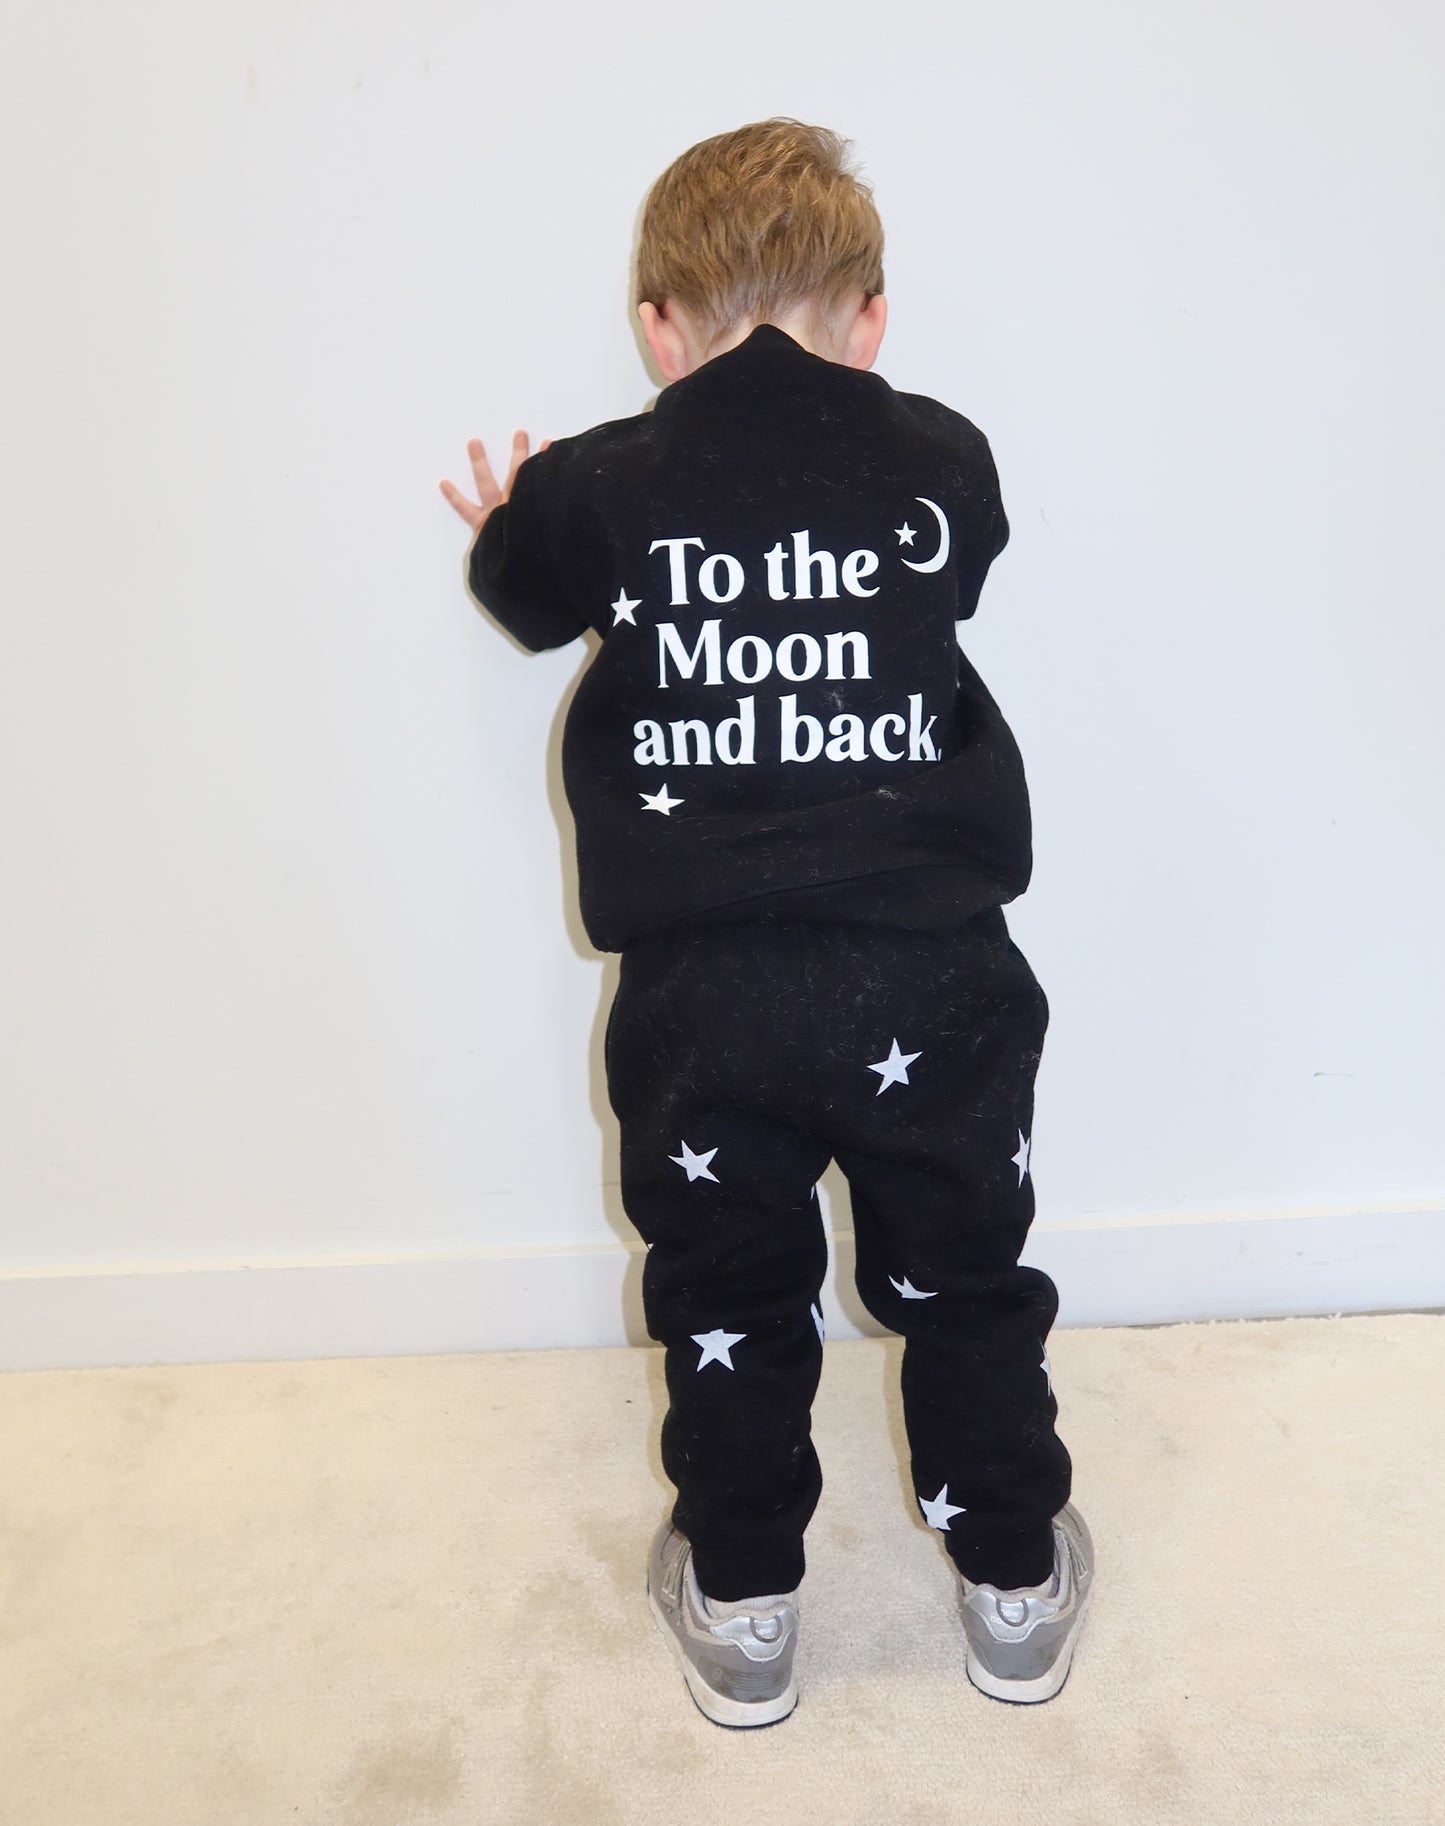 Brunette the Label / LITTLE To The Moon & Back Crewneck